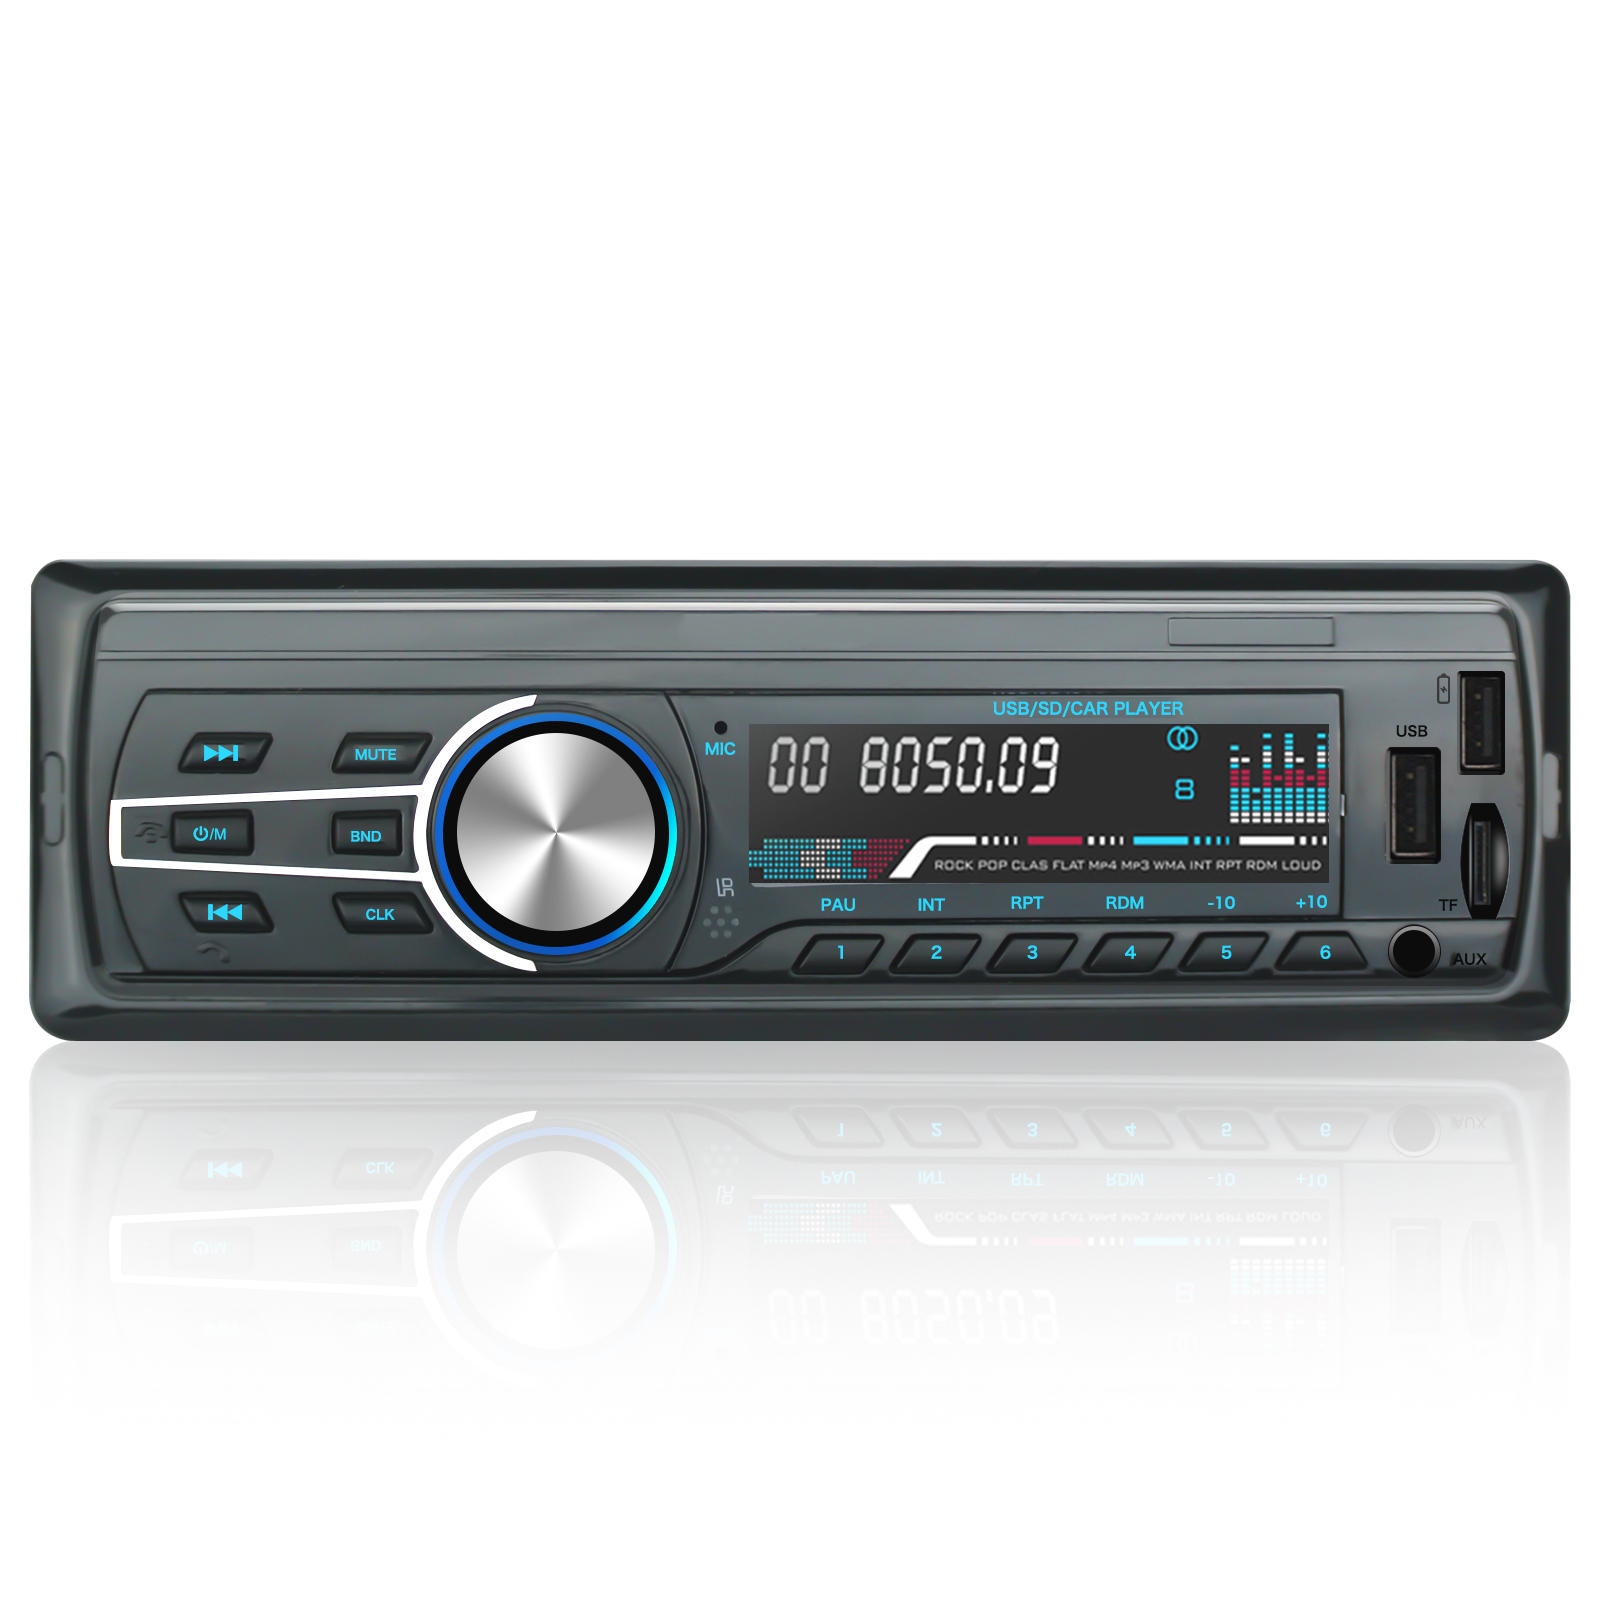 Universal Car 1Din Stereo Radio Receiver Auto MP3 Player Support bluetooth Hands-free FM With USB SD